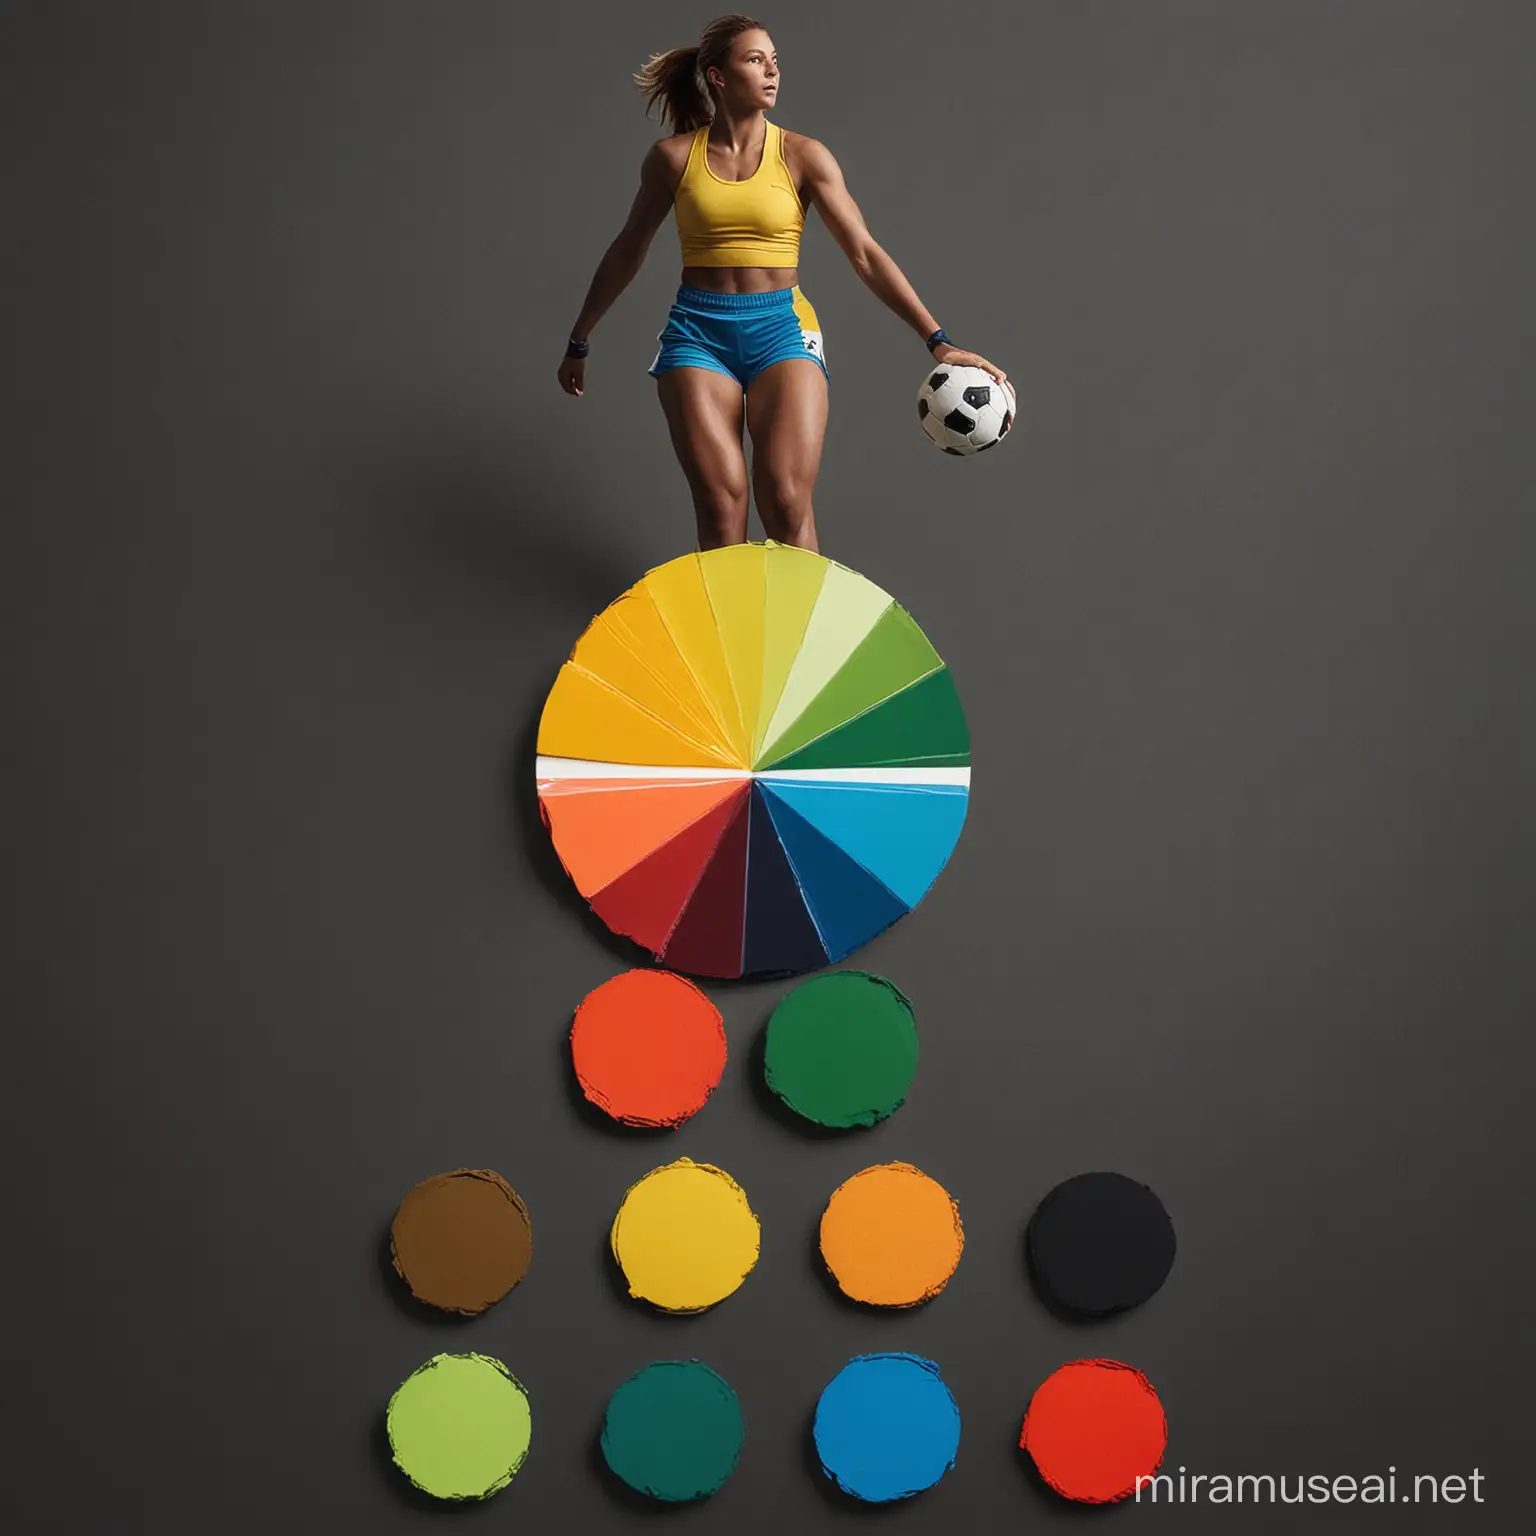 Create interesting color palettes of sports trending colors such as red, blue, green, black, yellow